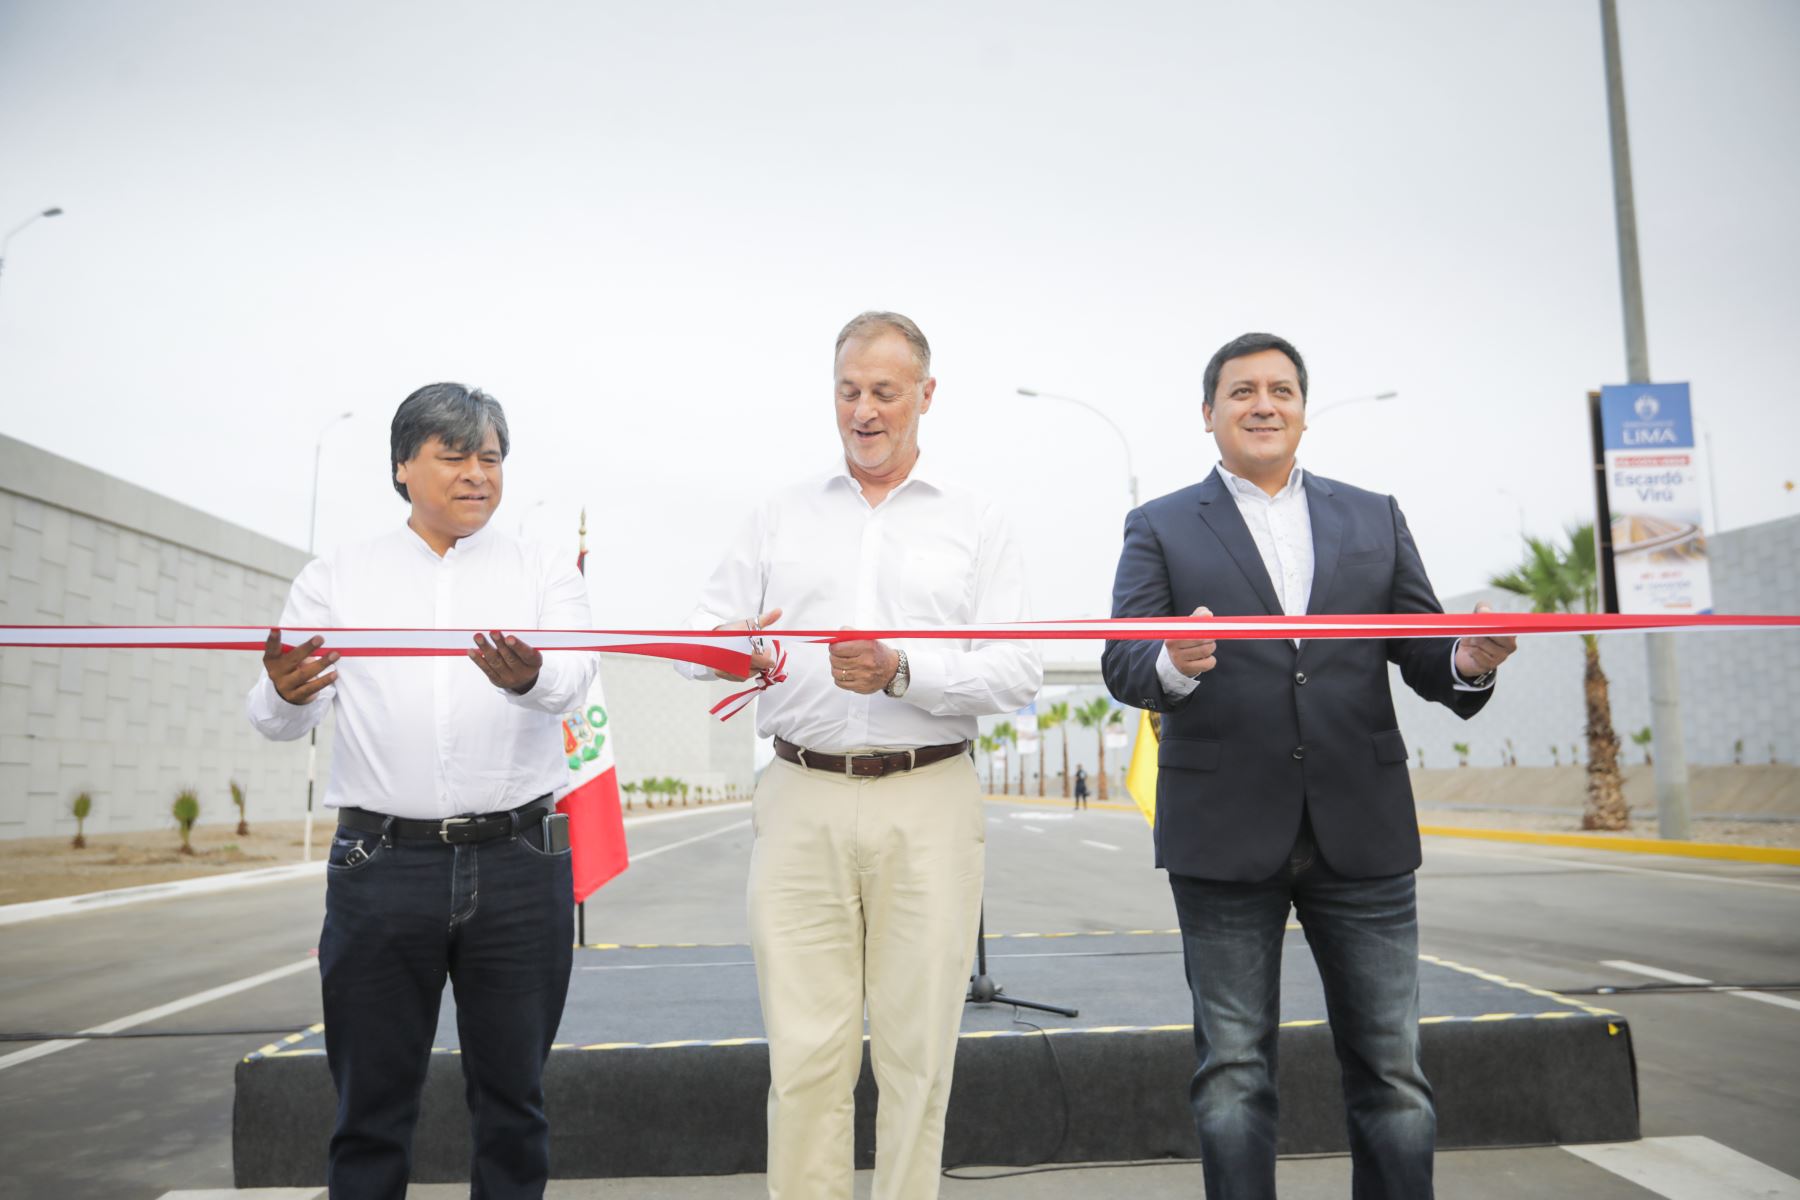 Opening Ceremony for the Green Coast Project undertaken by CRTG in Lima, Peru